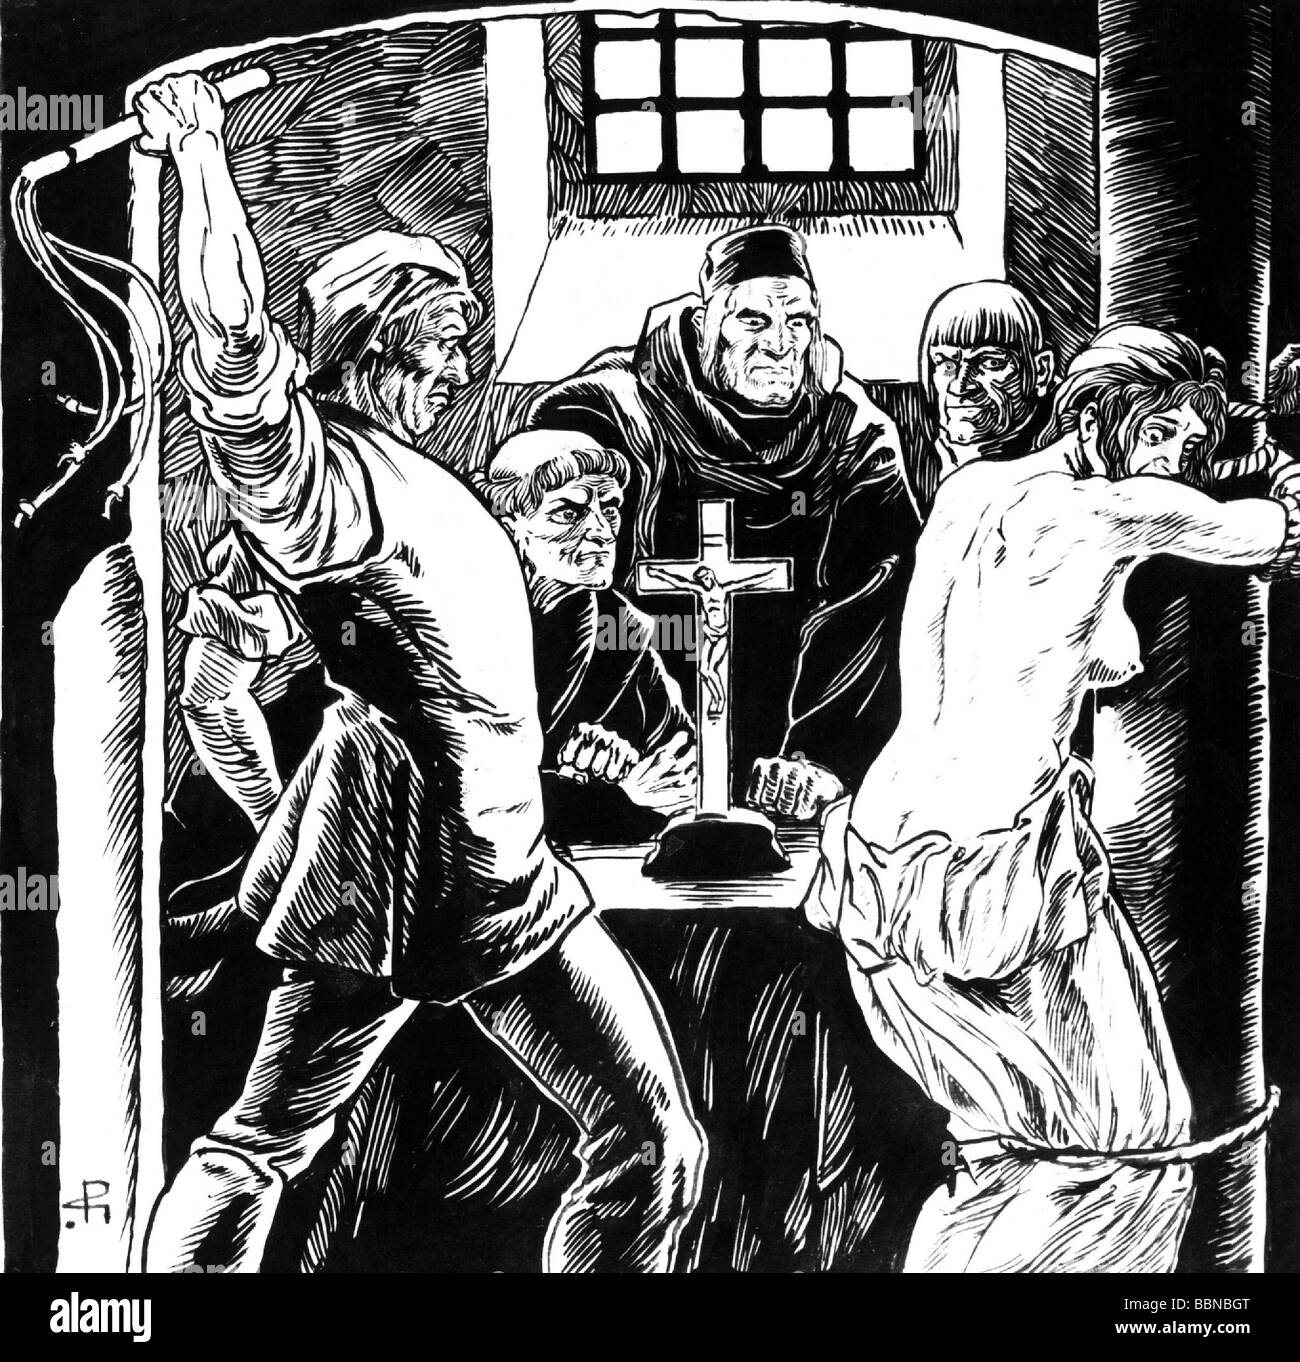 witches, witch-hunt, torture scene, lashing, illustration, witch hunt, flagellation, castigation, flagellations, scourge, whip, church, cross, clergyman, clergymen, punishment, torturer, woman, women, historic historical, people, female, Stock Photo